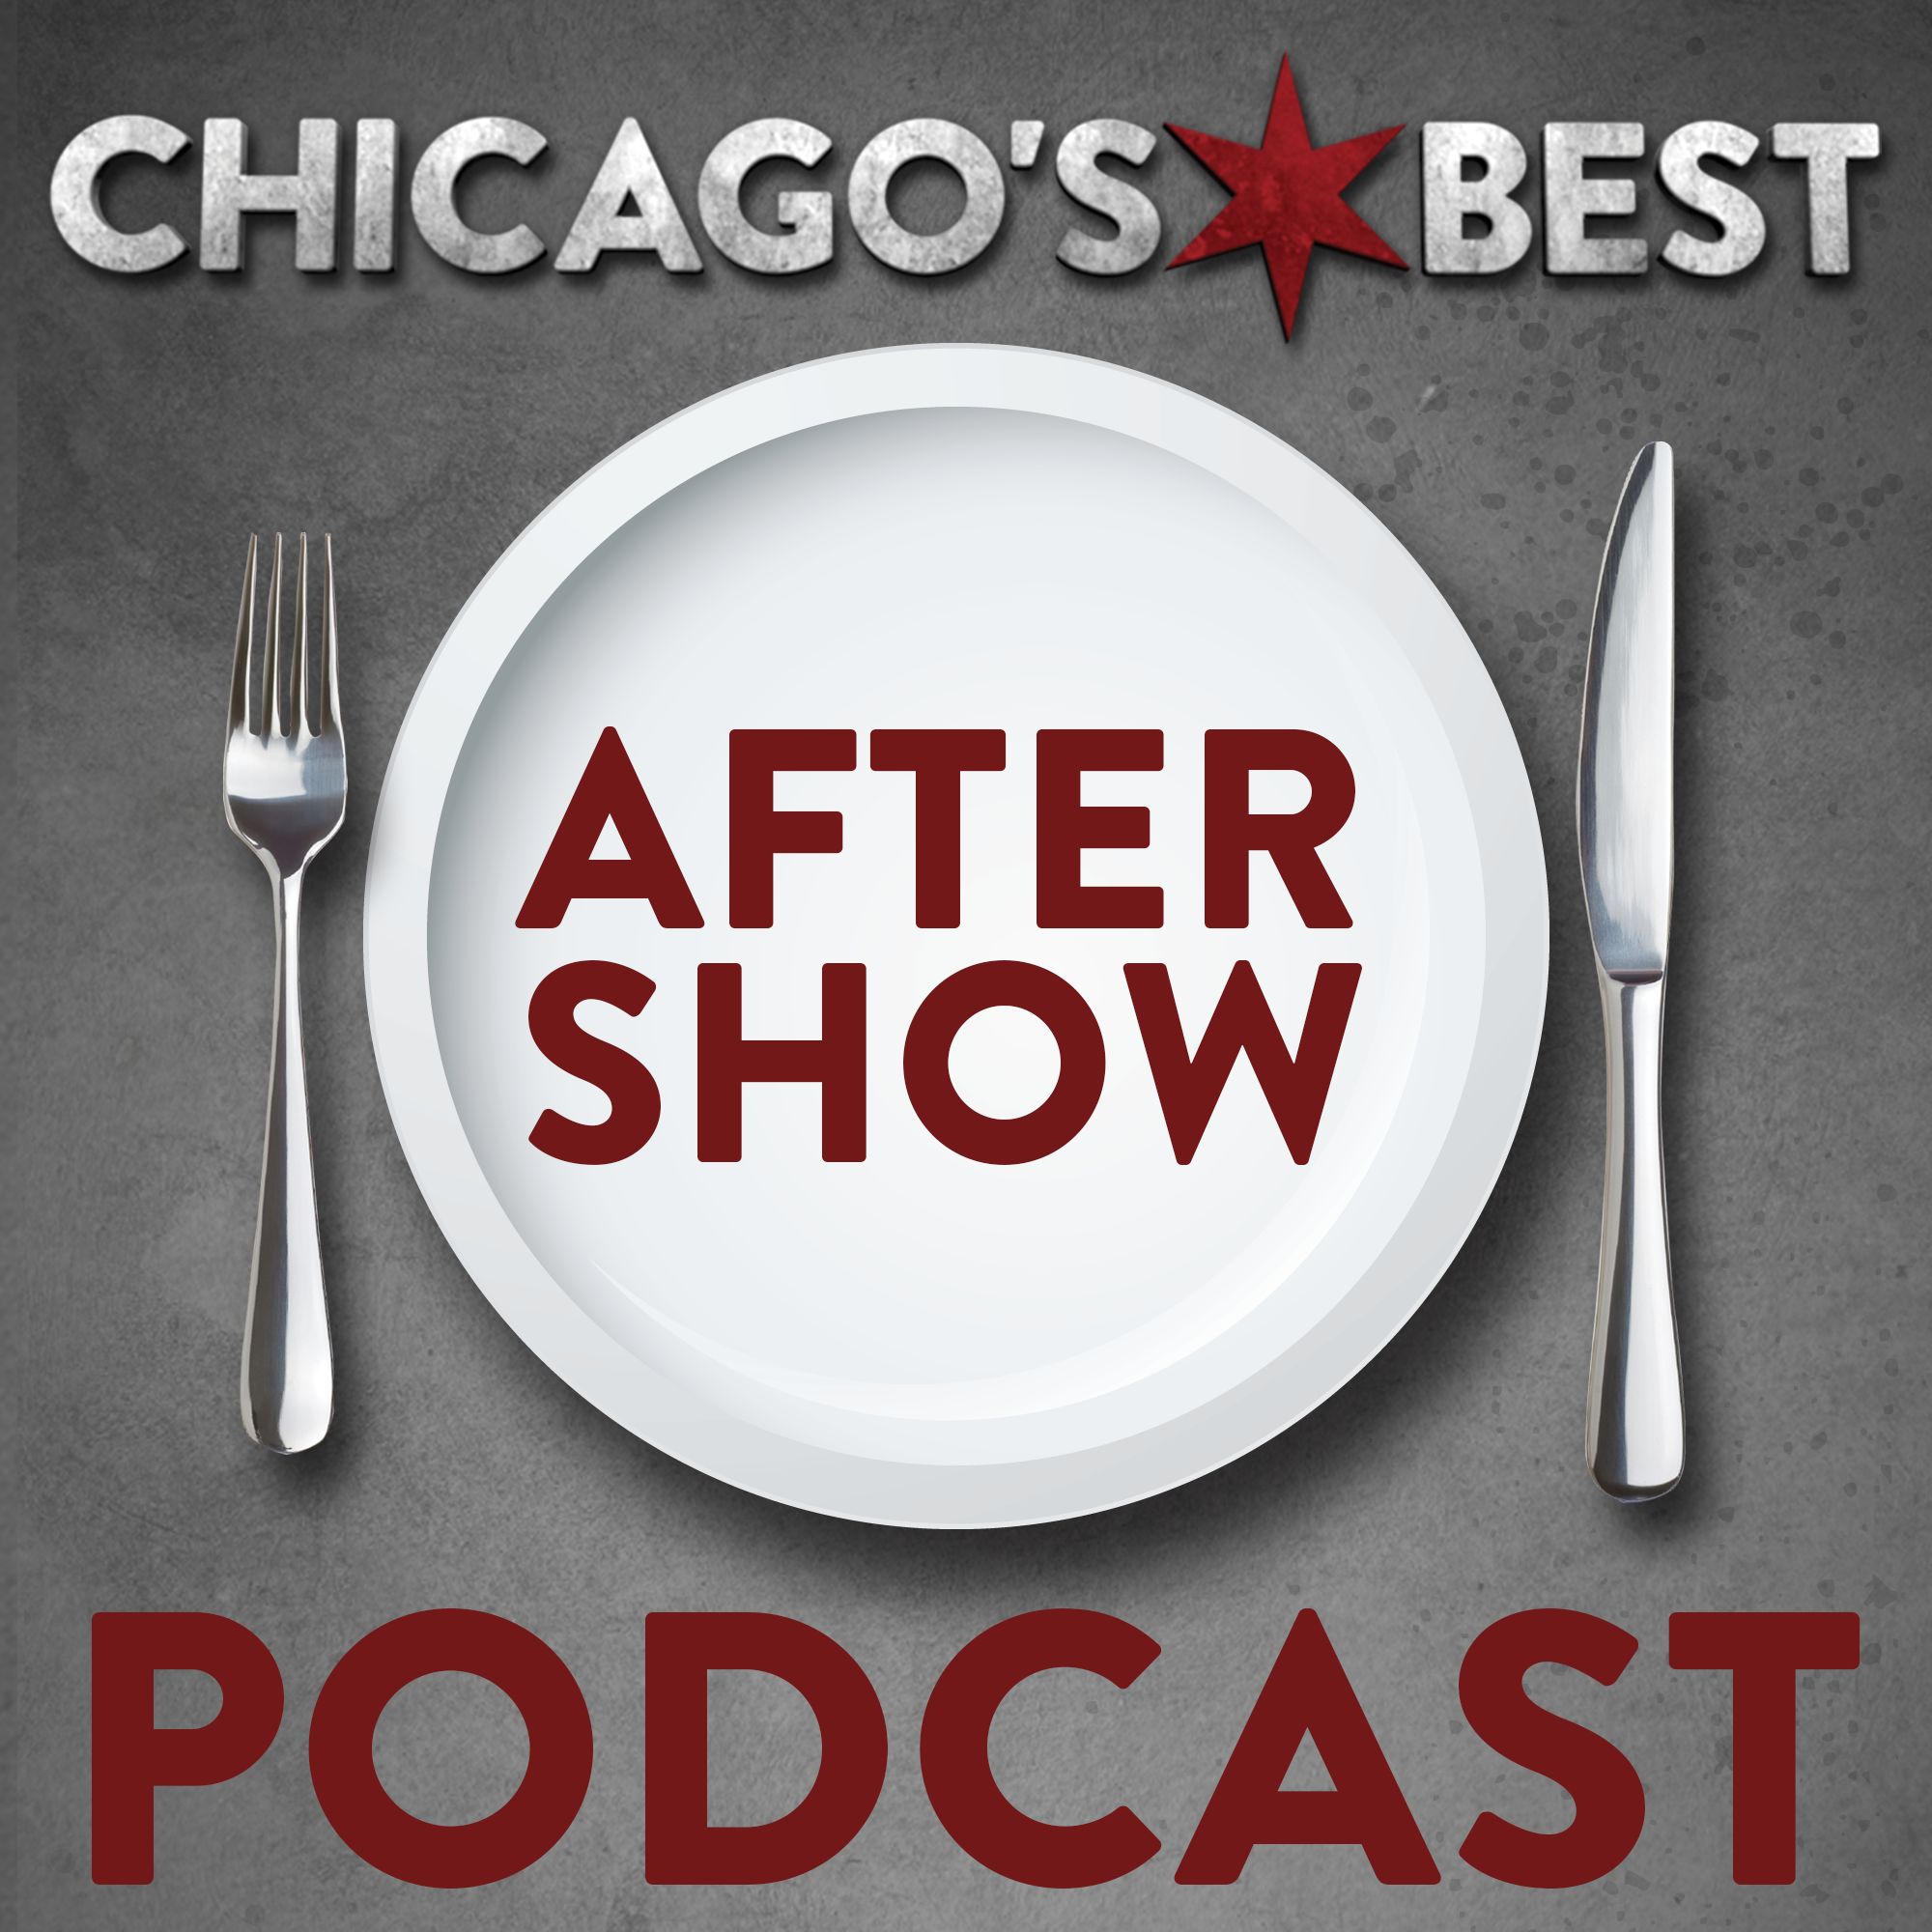 ANNOUNCEMENT! Chicago's Best After Show Podcast